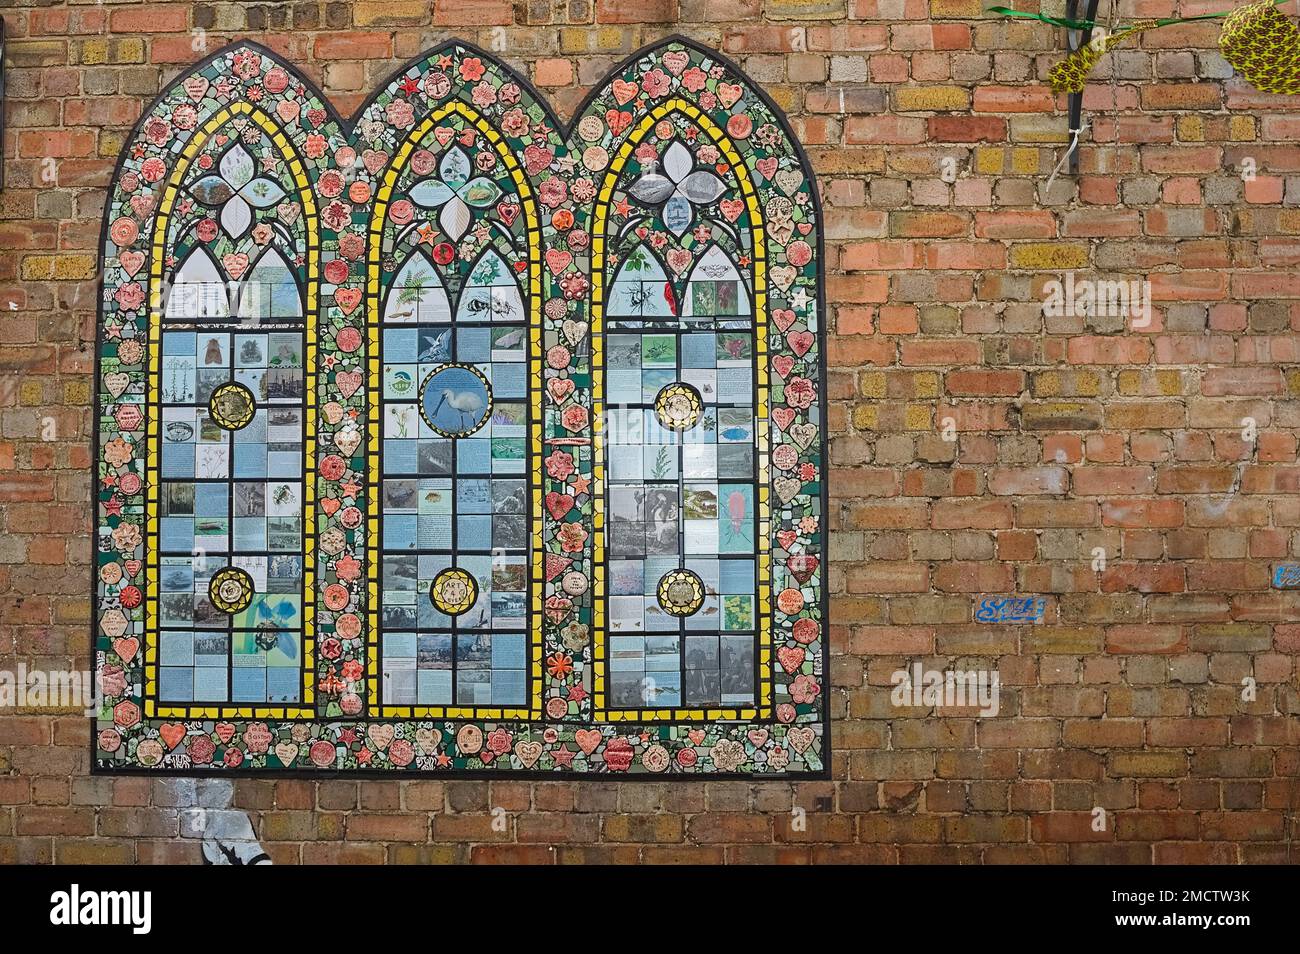 mural of a stained glass window on a brick wall in town Stock Photo